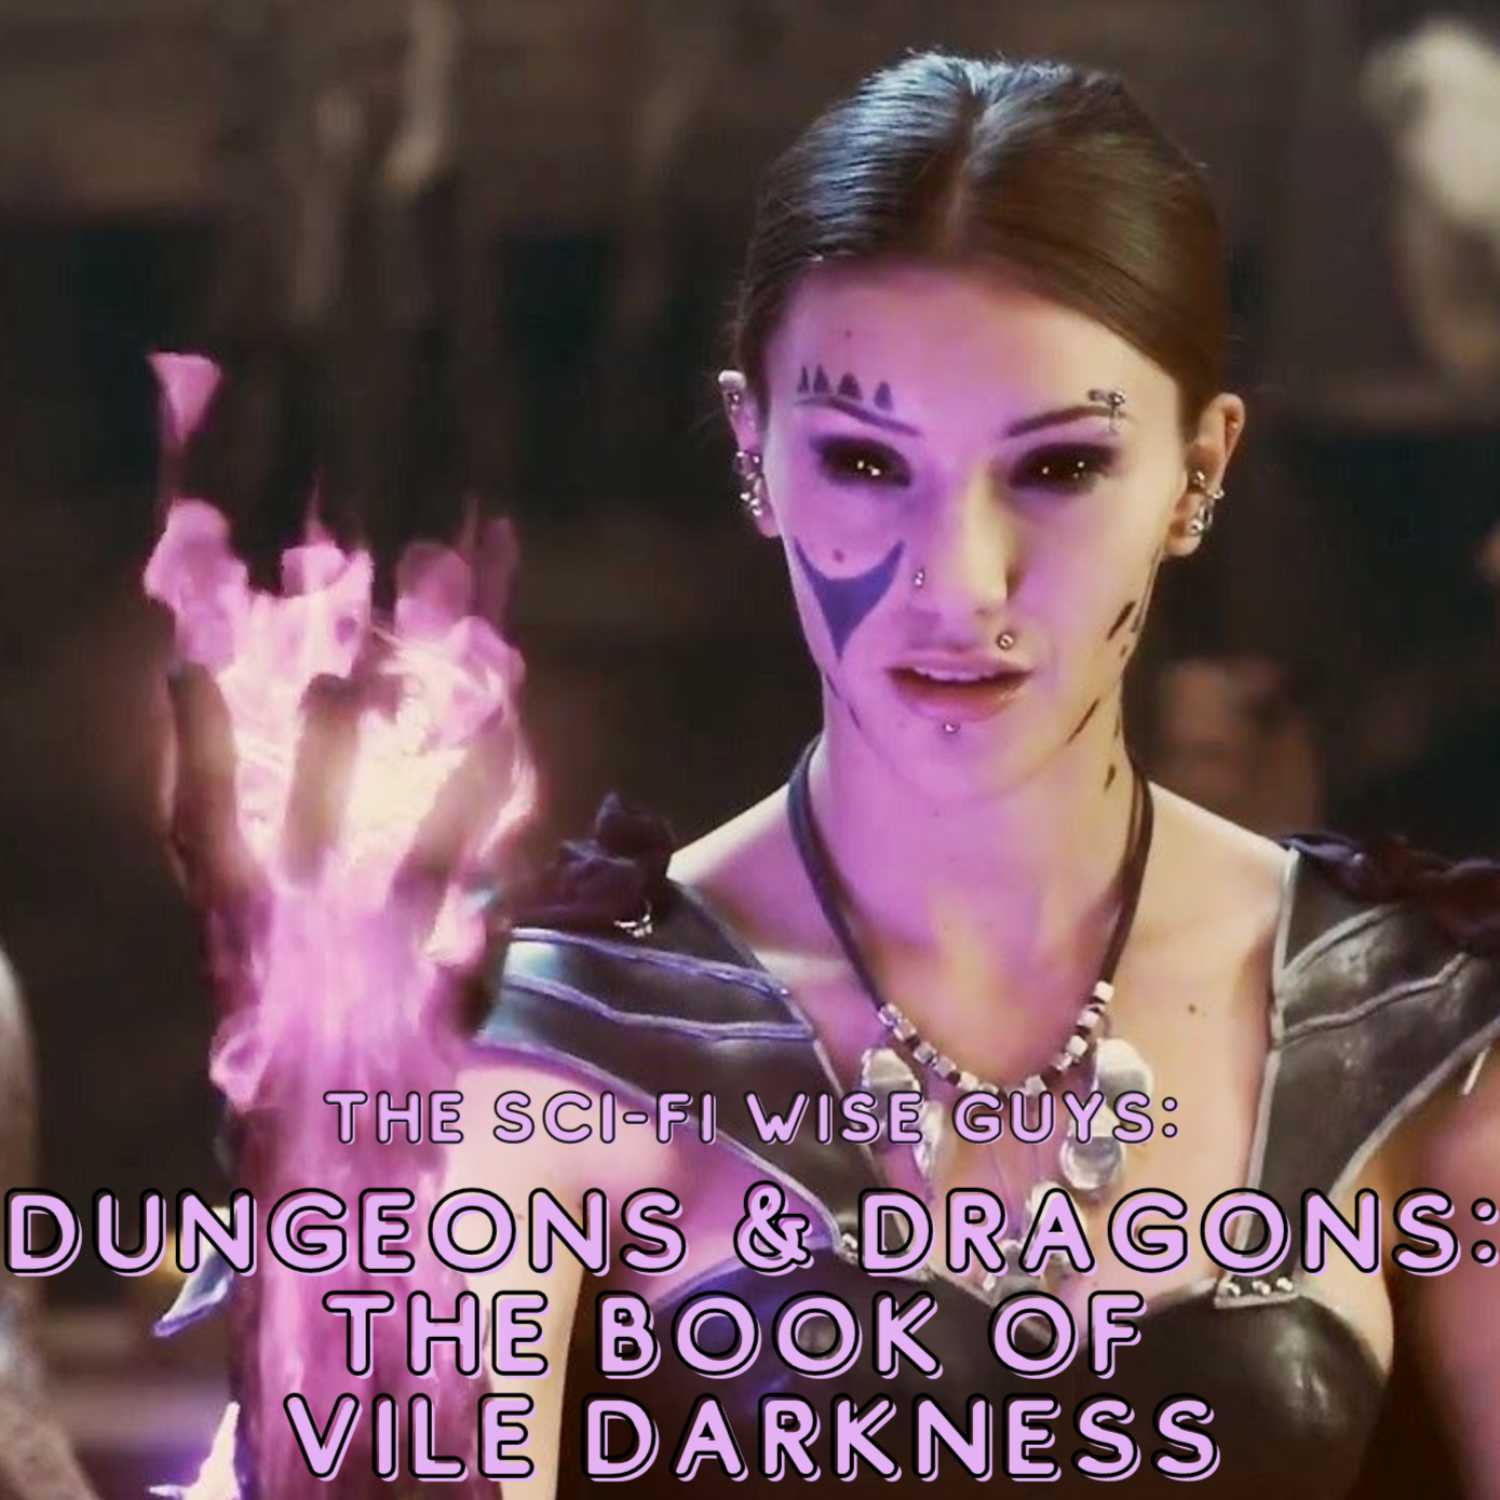 Pelor in the Streets, Raven Queen in the Sheets (Dungeons & Dragons: Book of Vile Darkness)